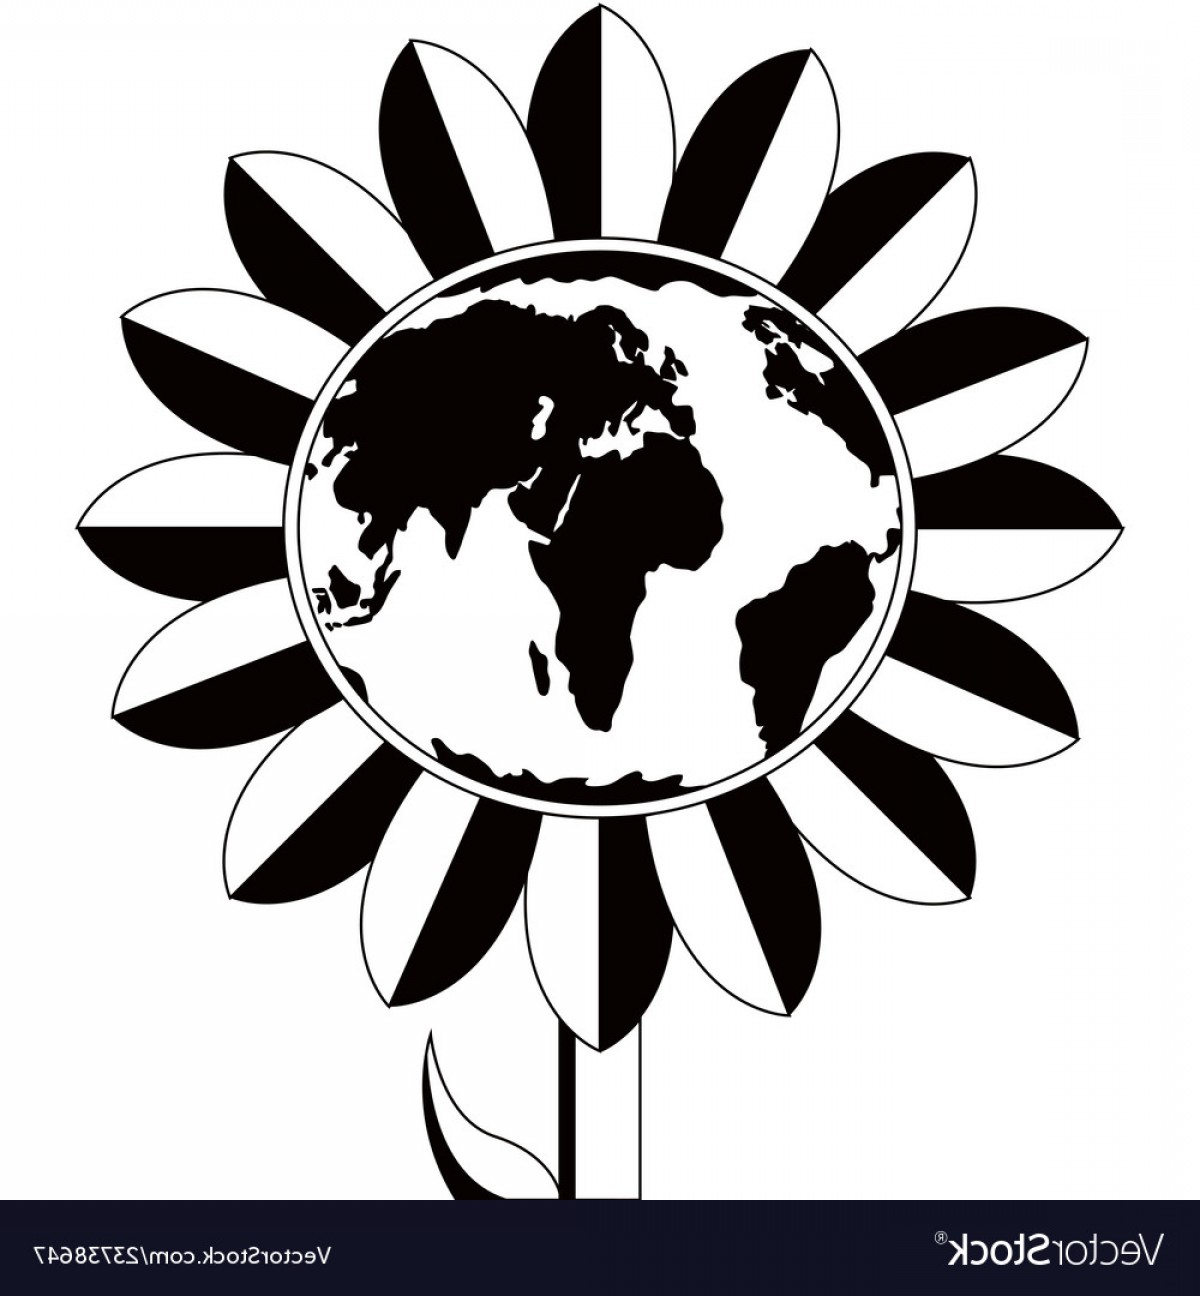 Download Sunflower Vector Black And White at Vectorified.com ...